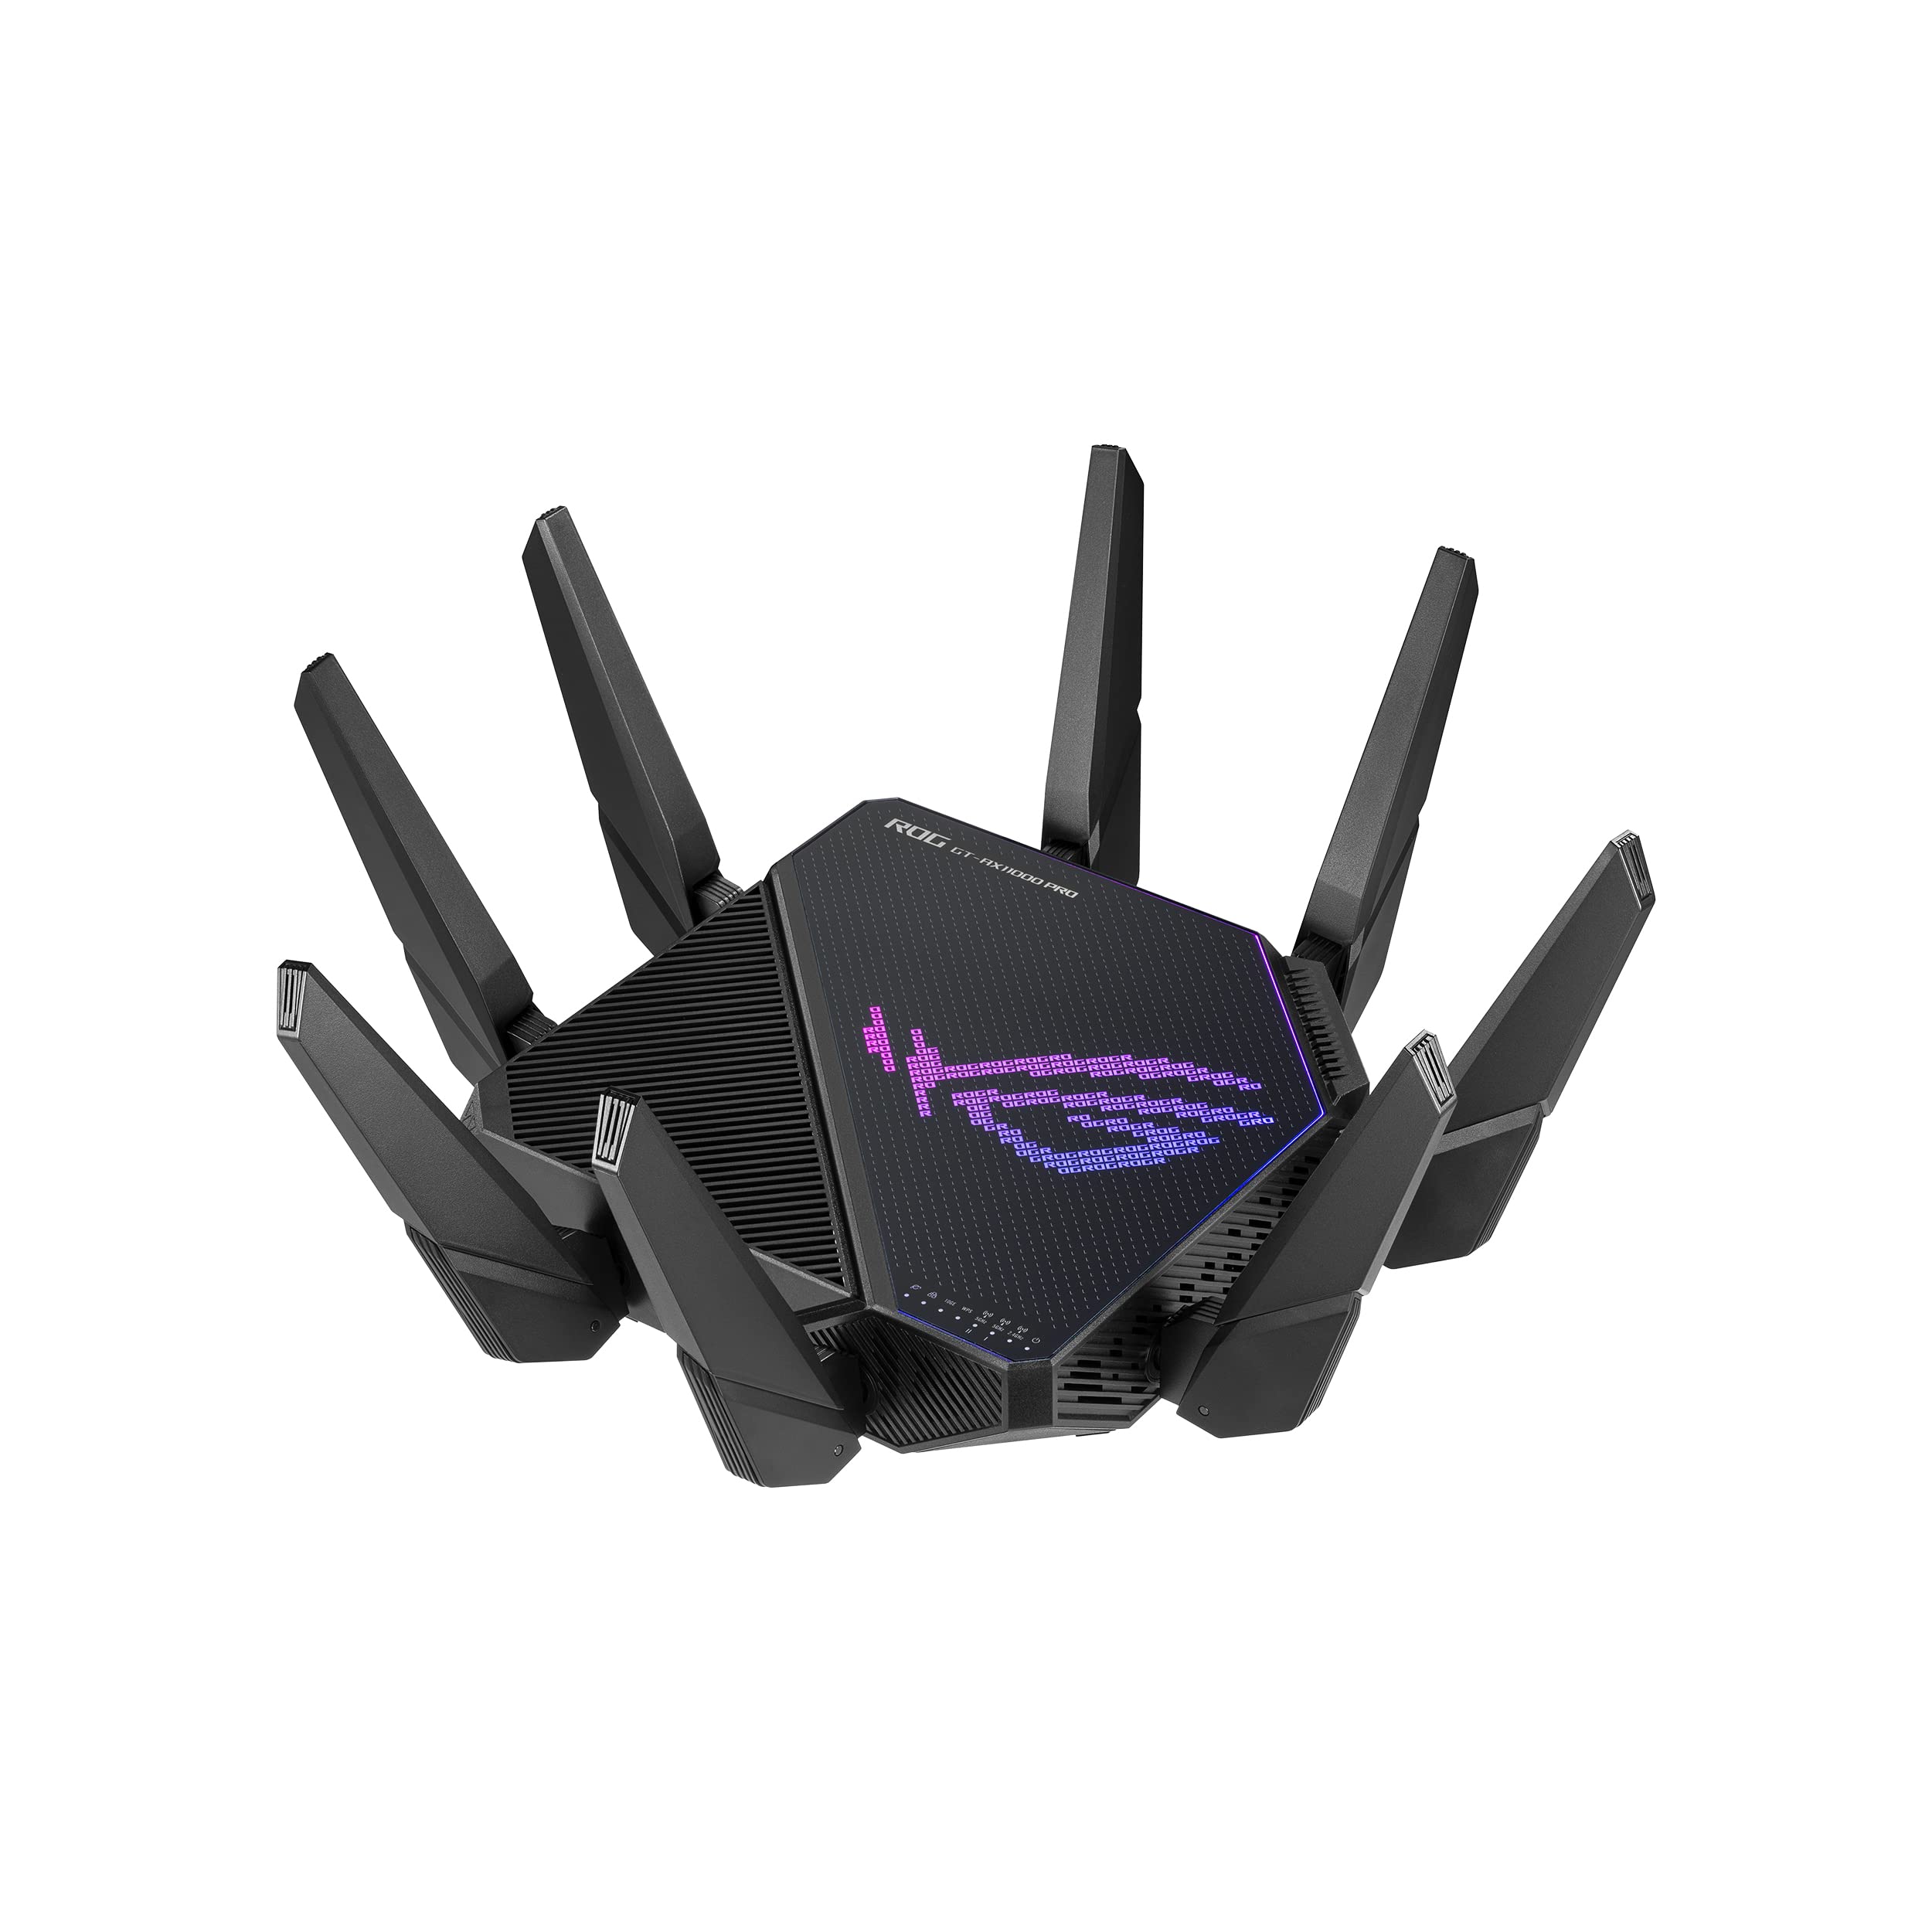 Asus ROG Rapture WiFi 6E Gaming Router (GT-AXE16000) - Quad-Band, 6 GHz Ready, Dual 10G Ports